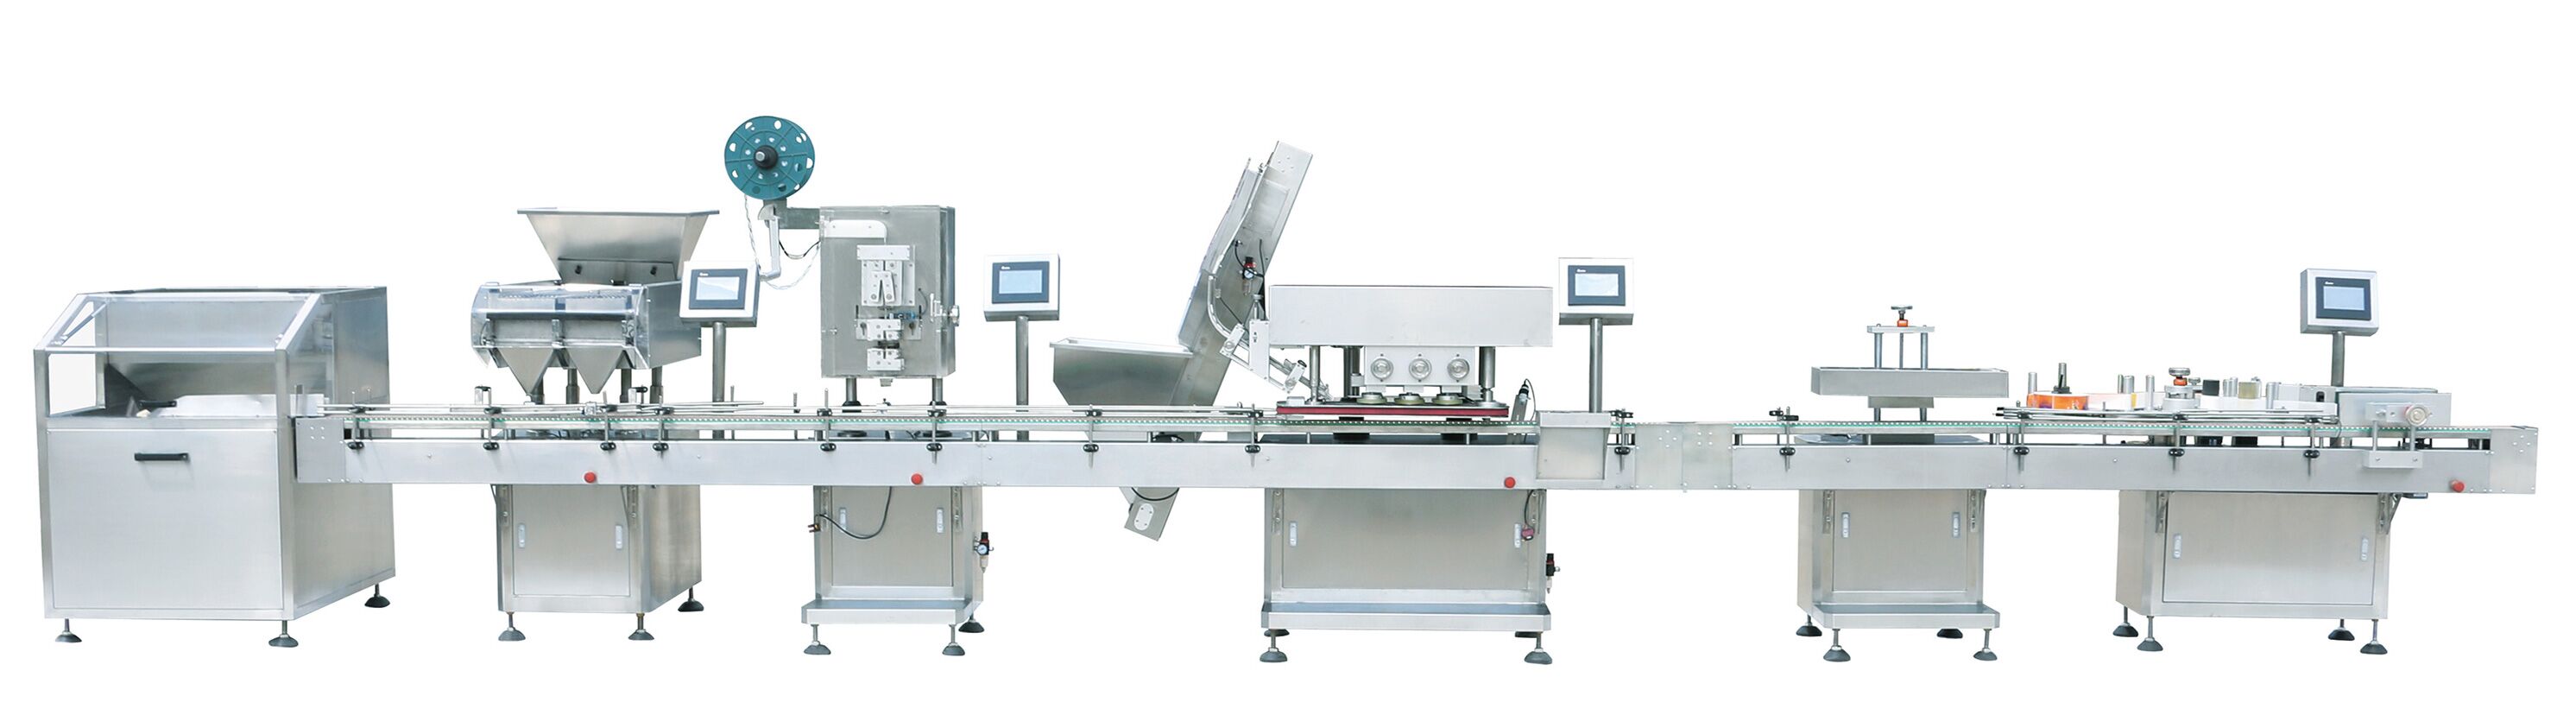  Counting Line Bottle Full Automatic Counting Bottling Machine Line Counting And Bottle Filling Machine 